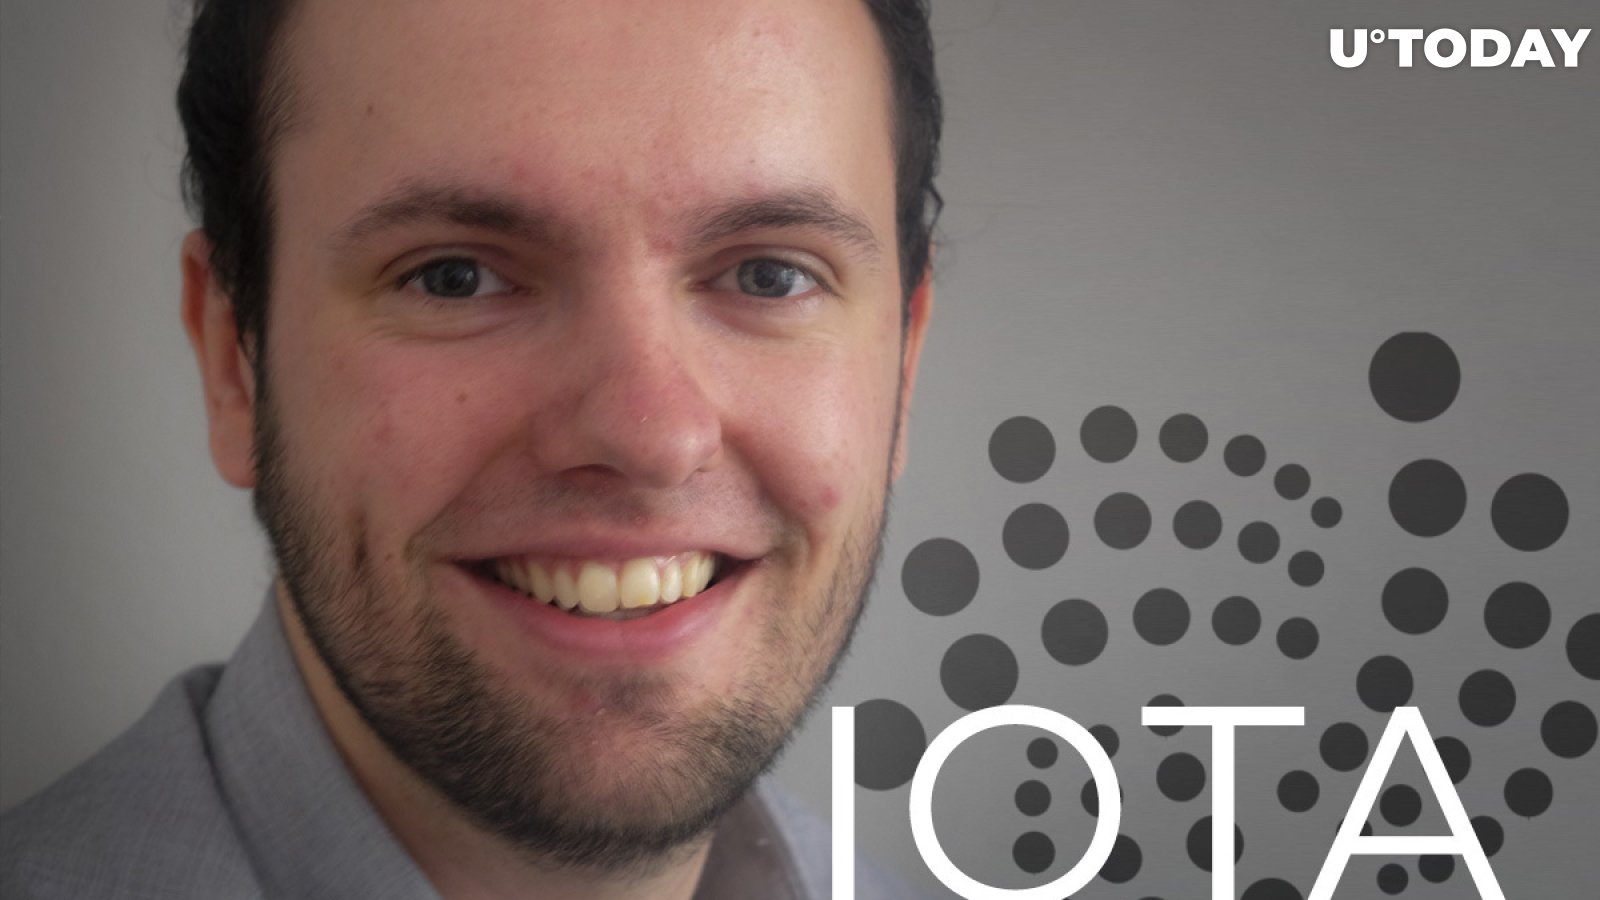 IOTA's Identity Solution Can Protect Your Data From Tech Giants: IOTA Foundation's Jelle Millenaar